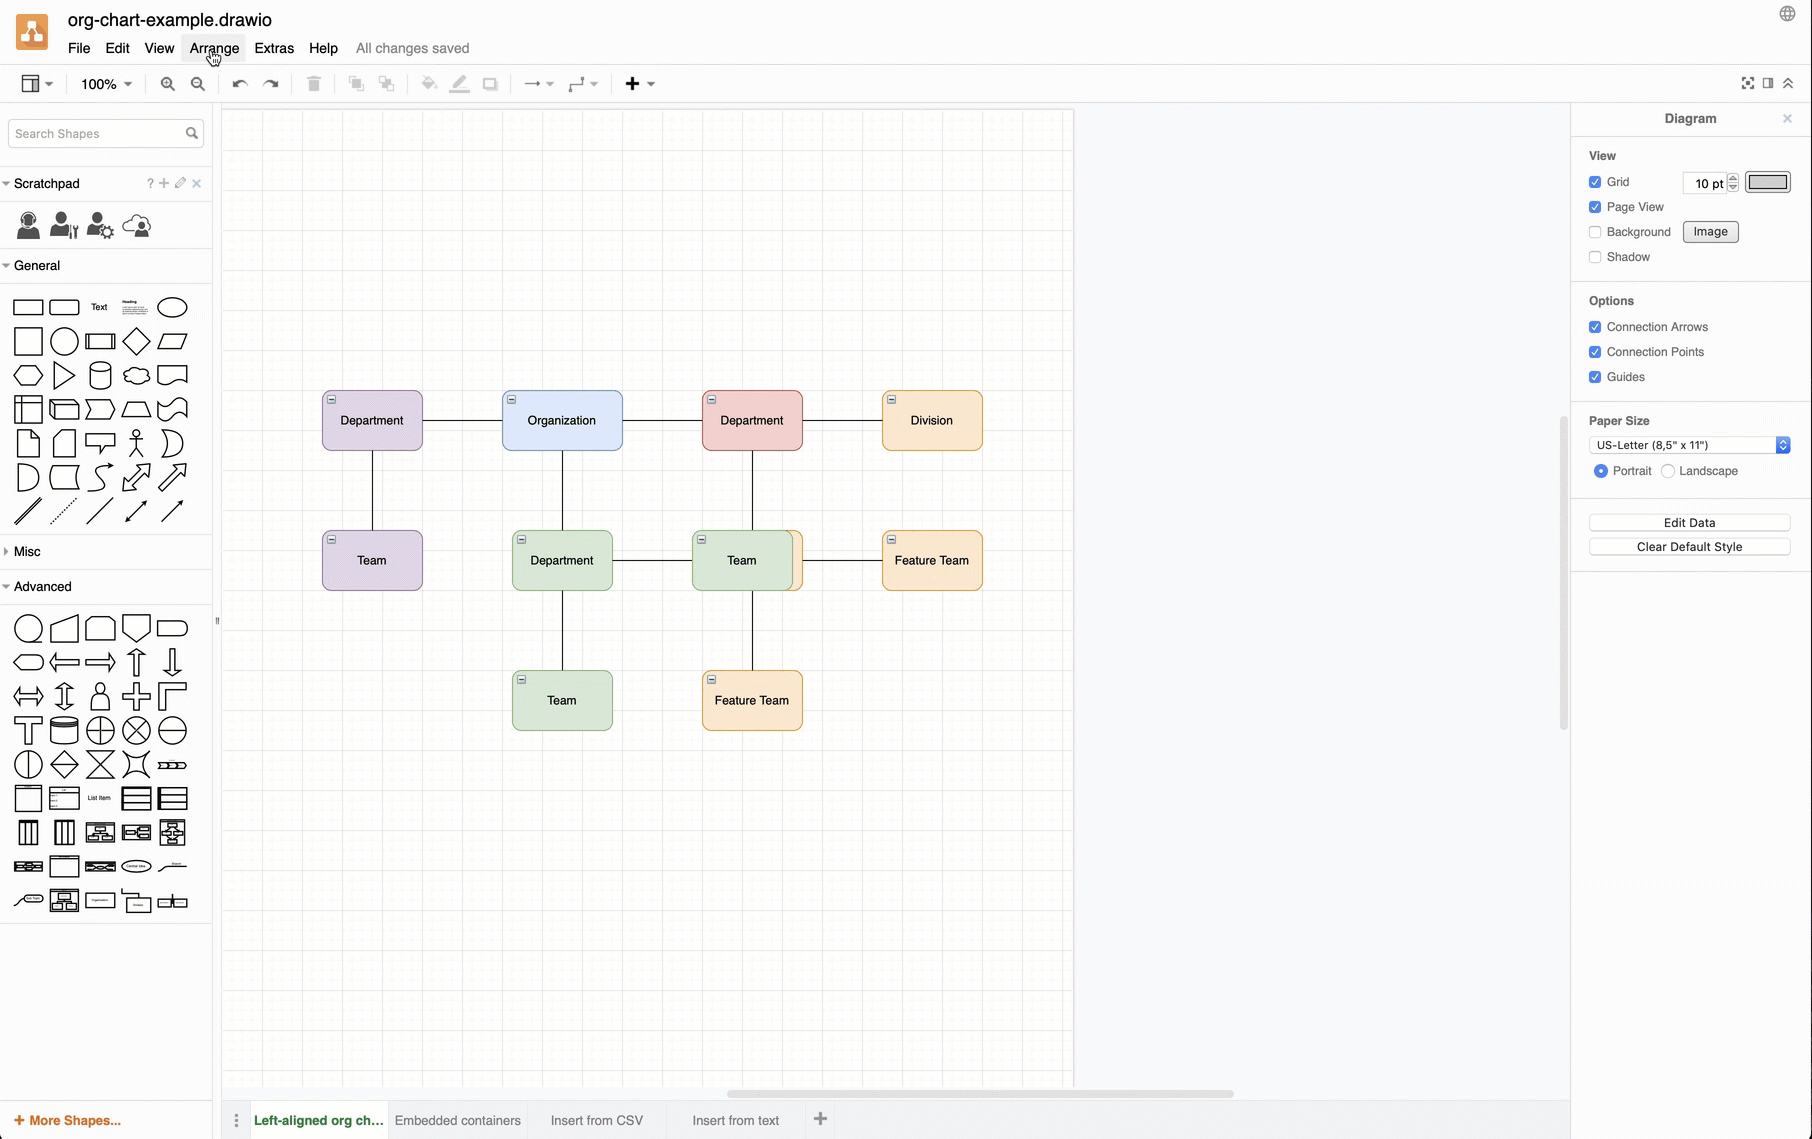 Use Arrange > Layouts > Org Charts to auto-rearrange your diagram neatly in draw.io